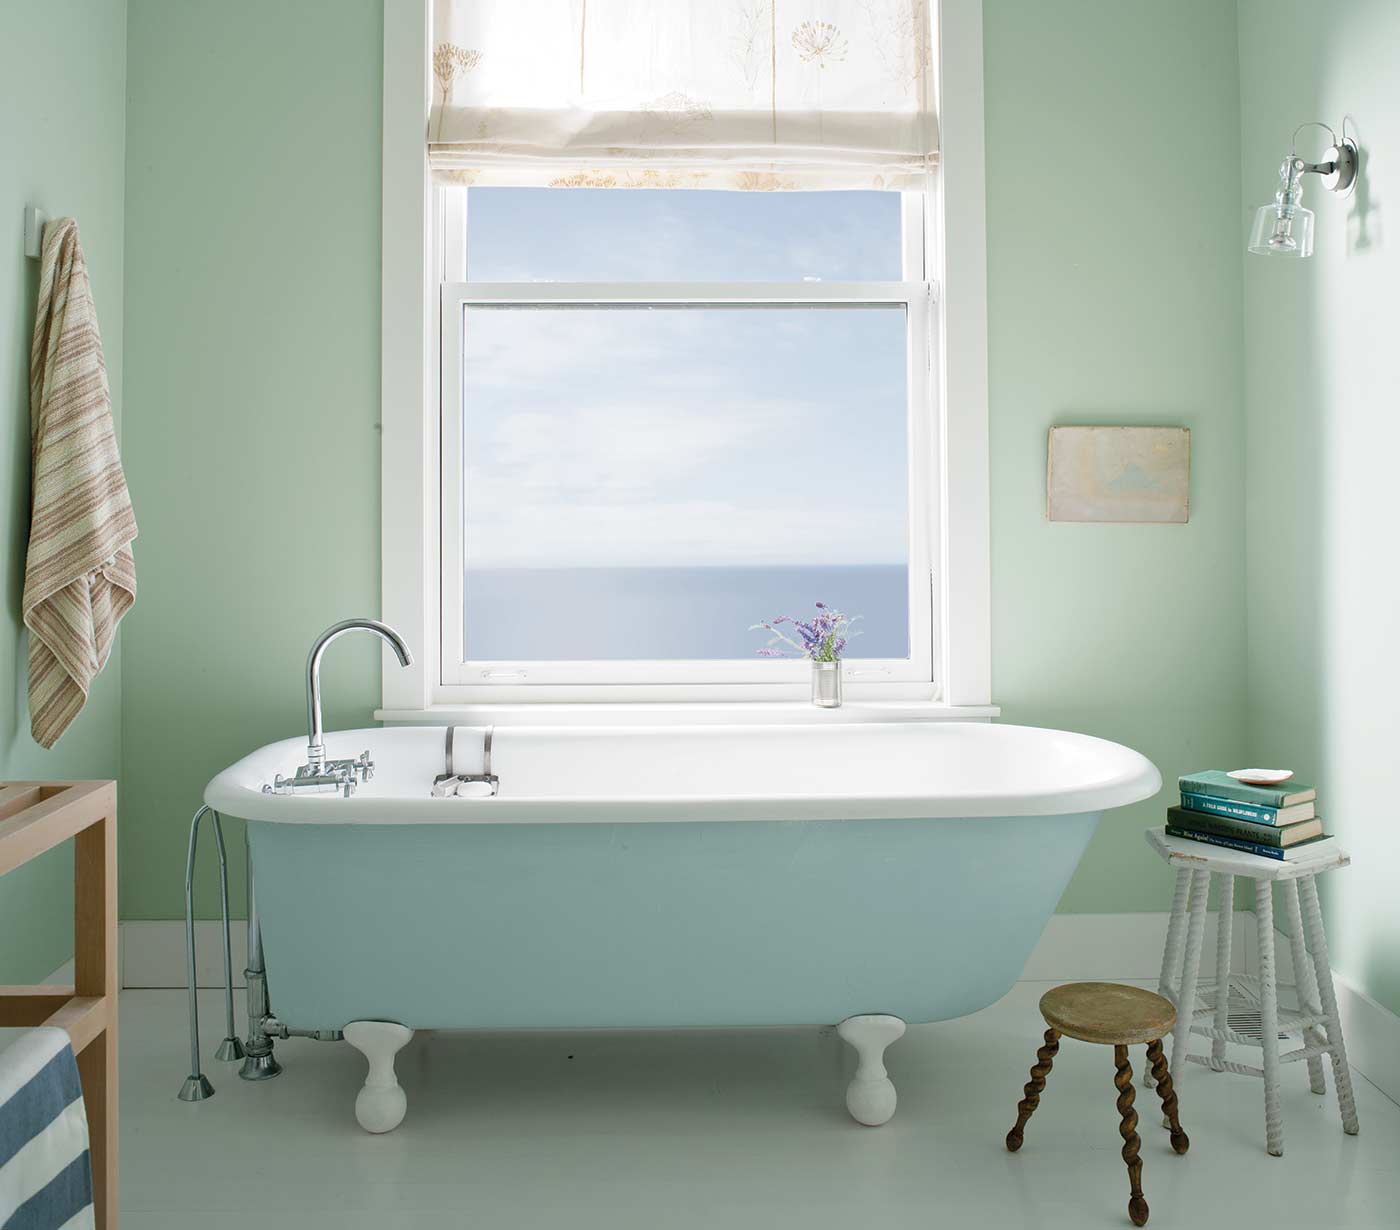 light blue and white bathtub on claw feet in front of a large frosted mirror